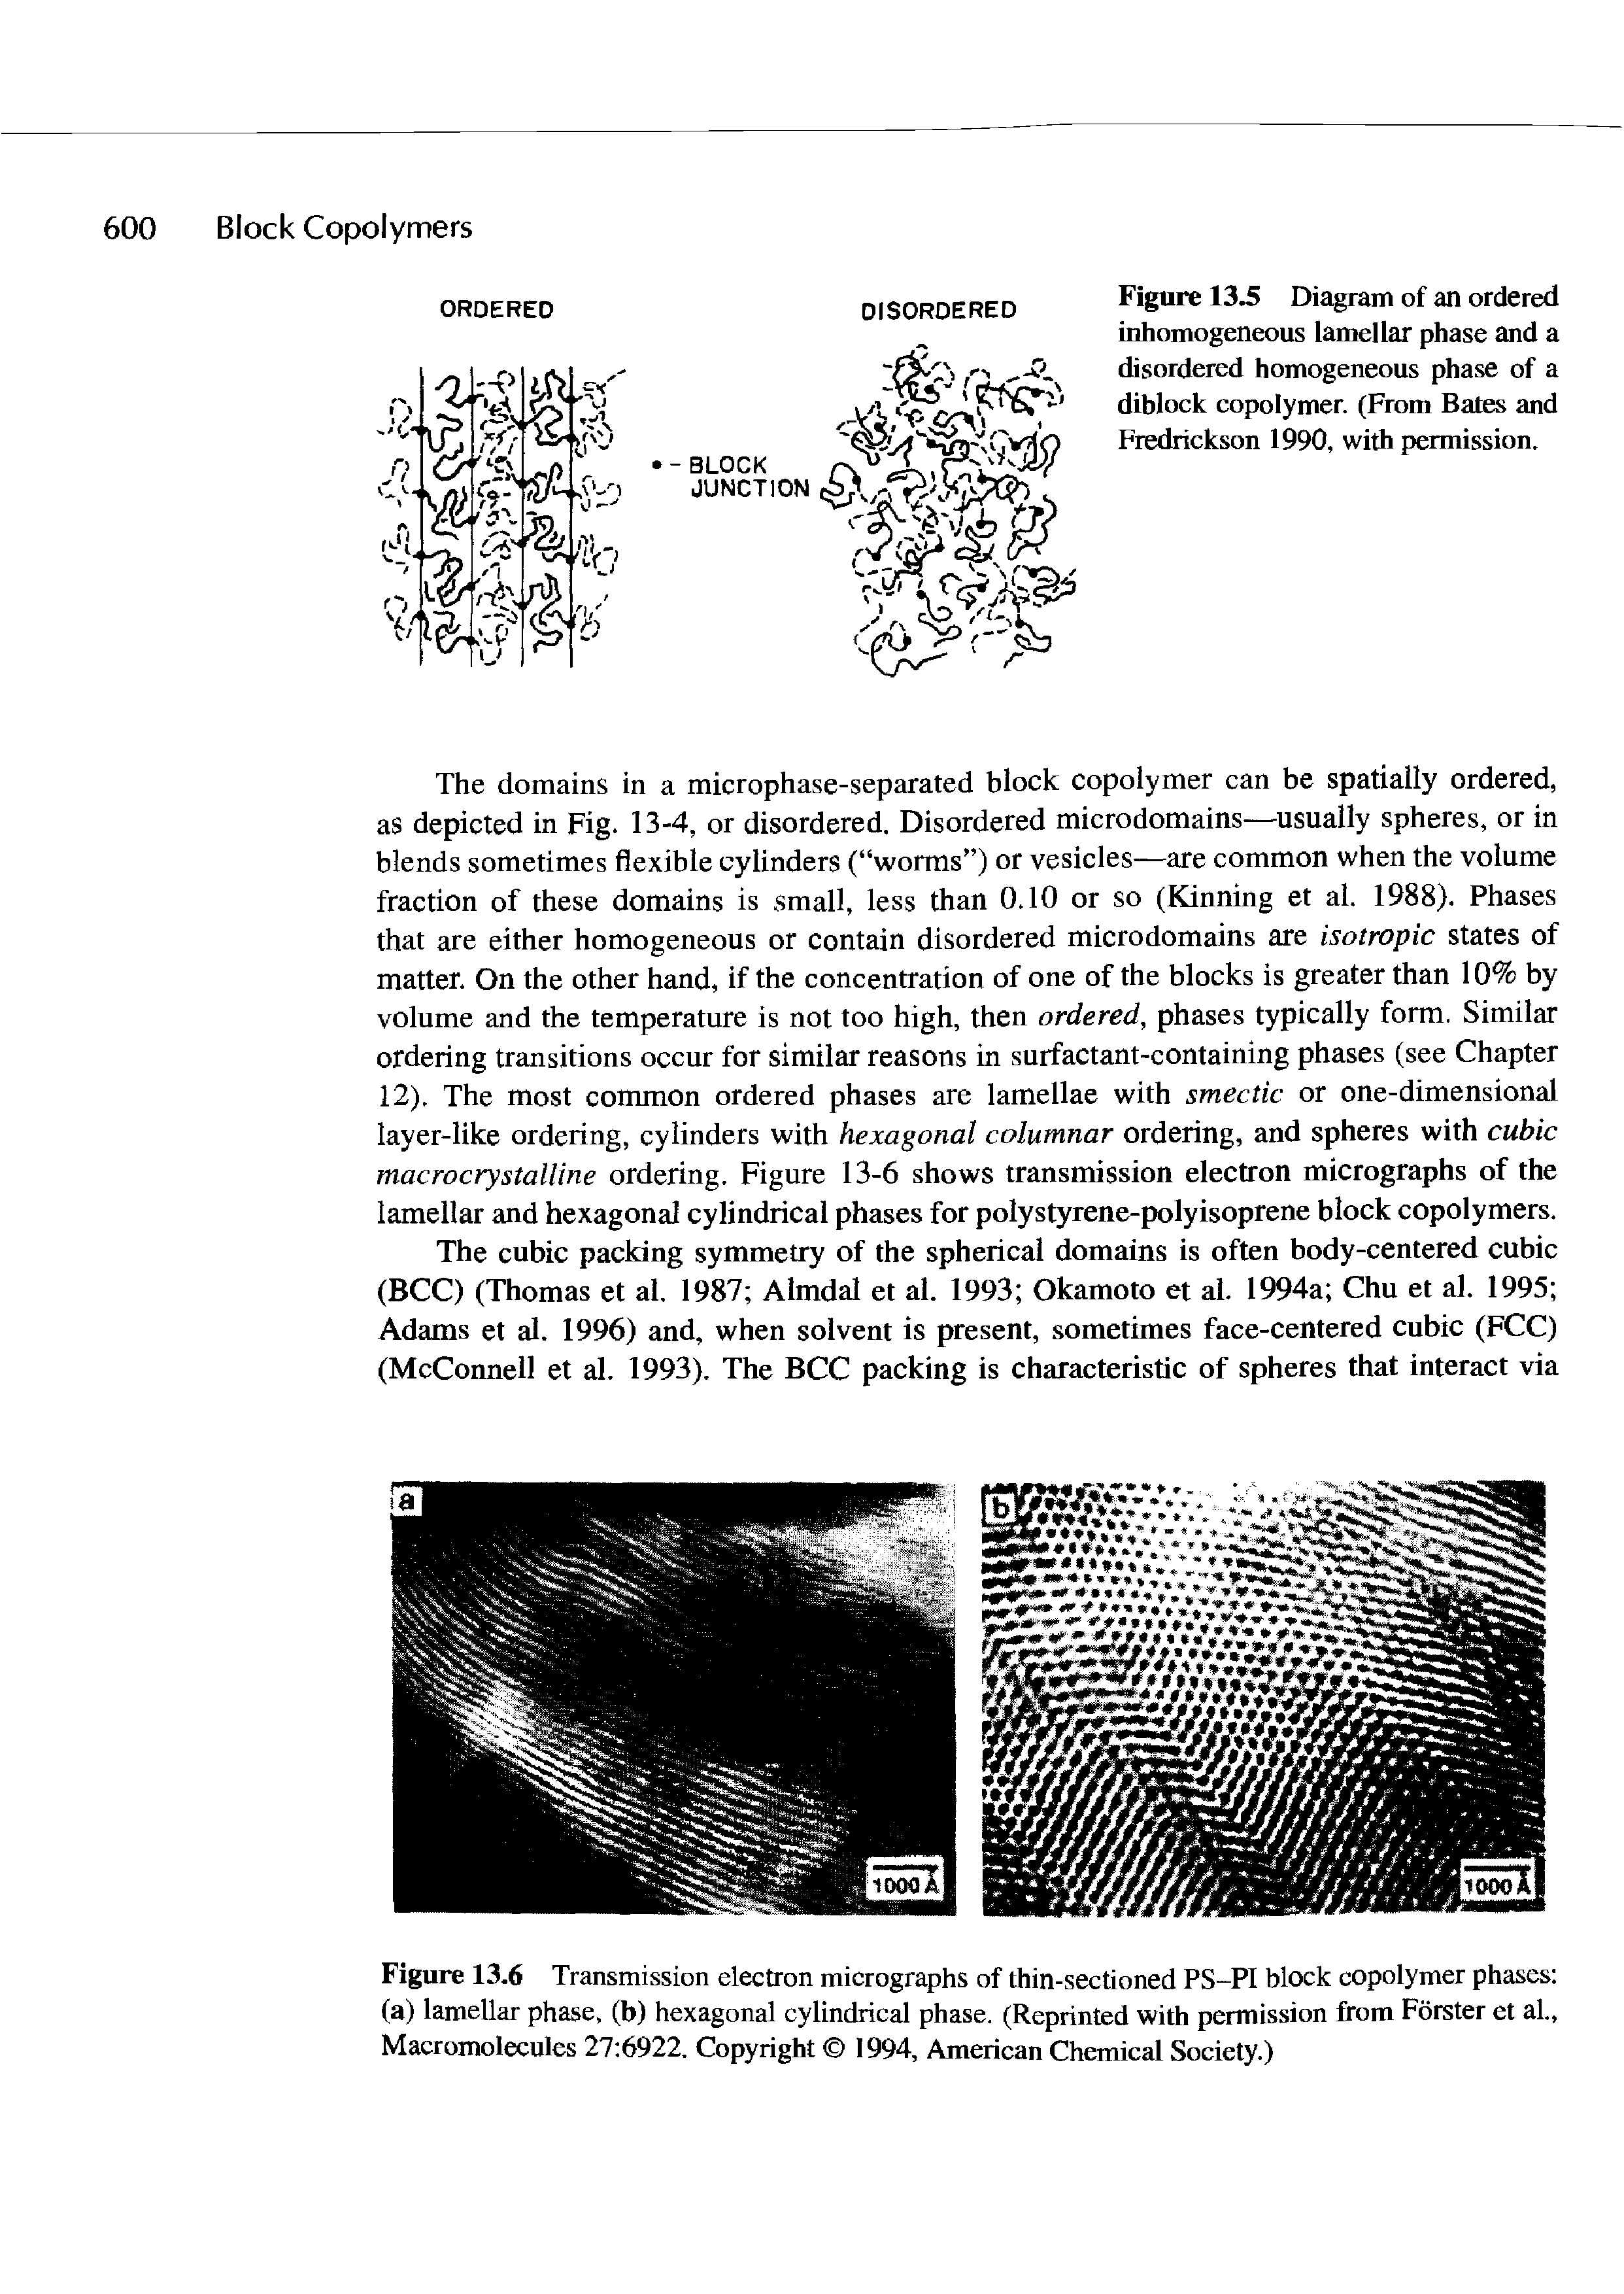 Figure 13.6 Transmission electron micrographs of thin-sectioned PS-PI block copolymer phases (a) lamellar phase, (b) hexagonal cylindrical phase. (Reprinted with permission from Forster et al.. Macromolecules 27 6922. Copyright 1994, American Chemical Society.)...